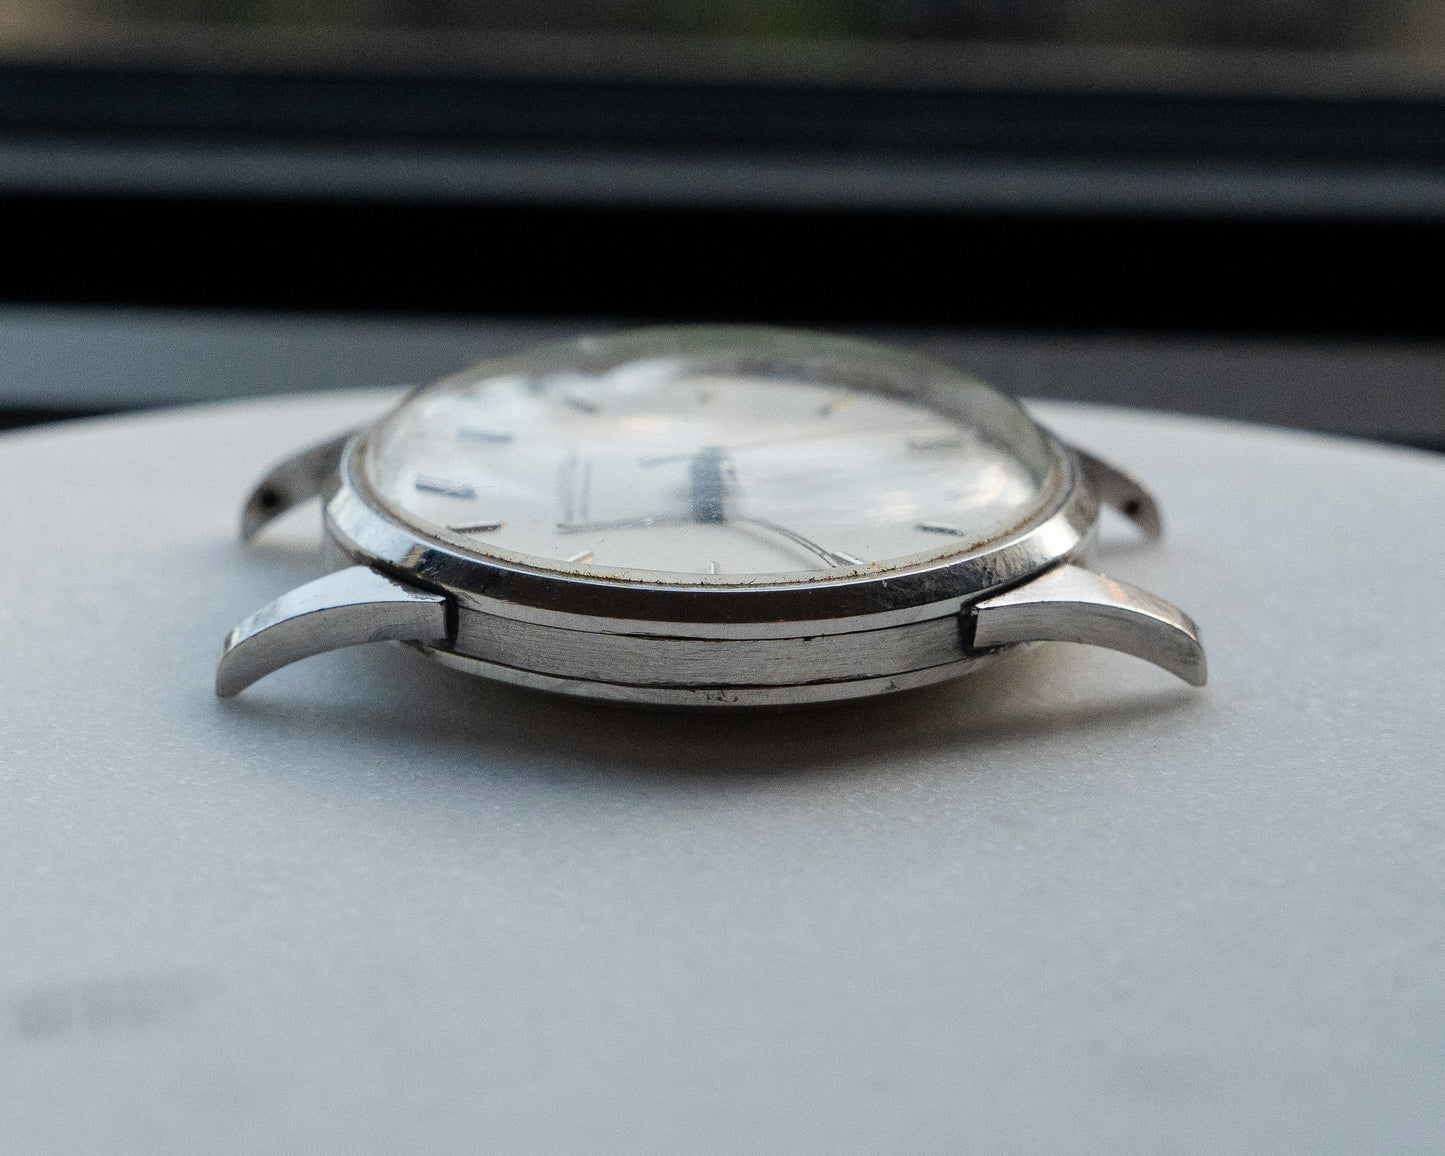 IWC dress watch in platinum - Caliber 89, early 1960's